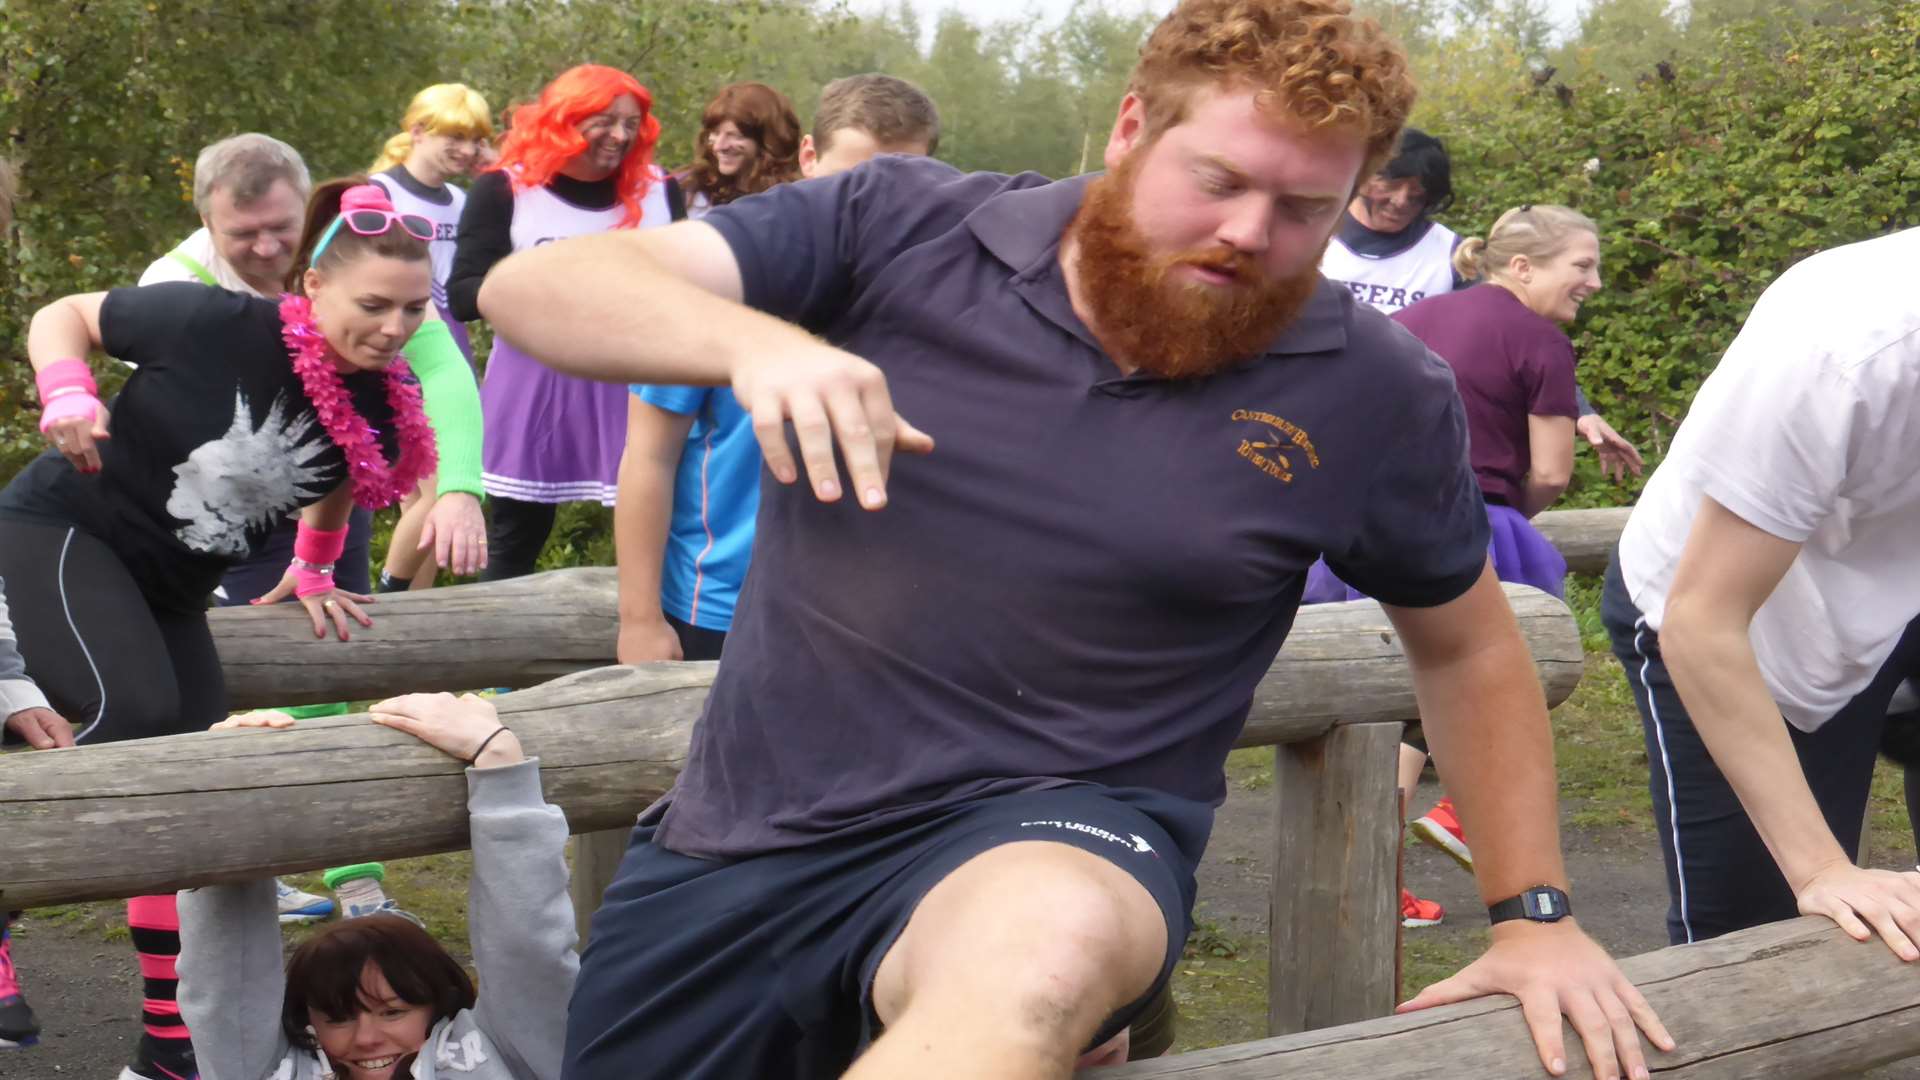 More than £15k was raised for 23 charities at the annual KM Assault Course Challenge at Betteshanger Country Park. A group of friends from Canterbury supported Catching Lives.